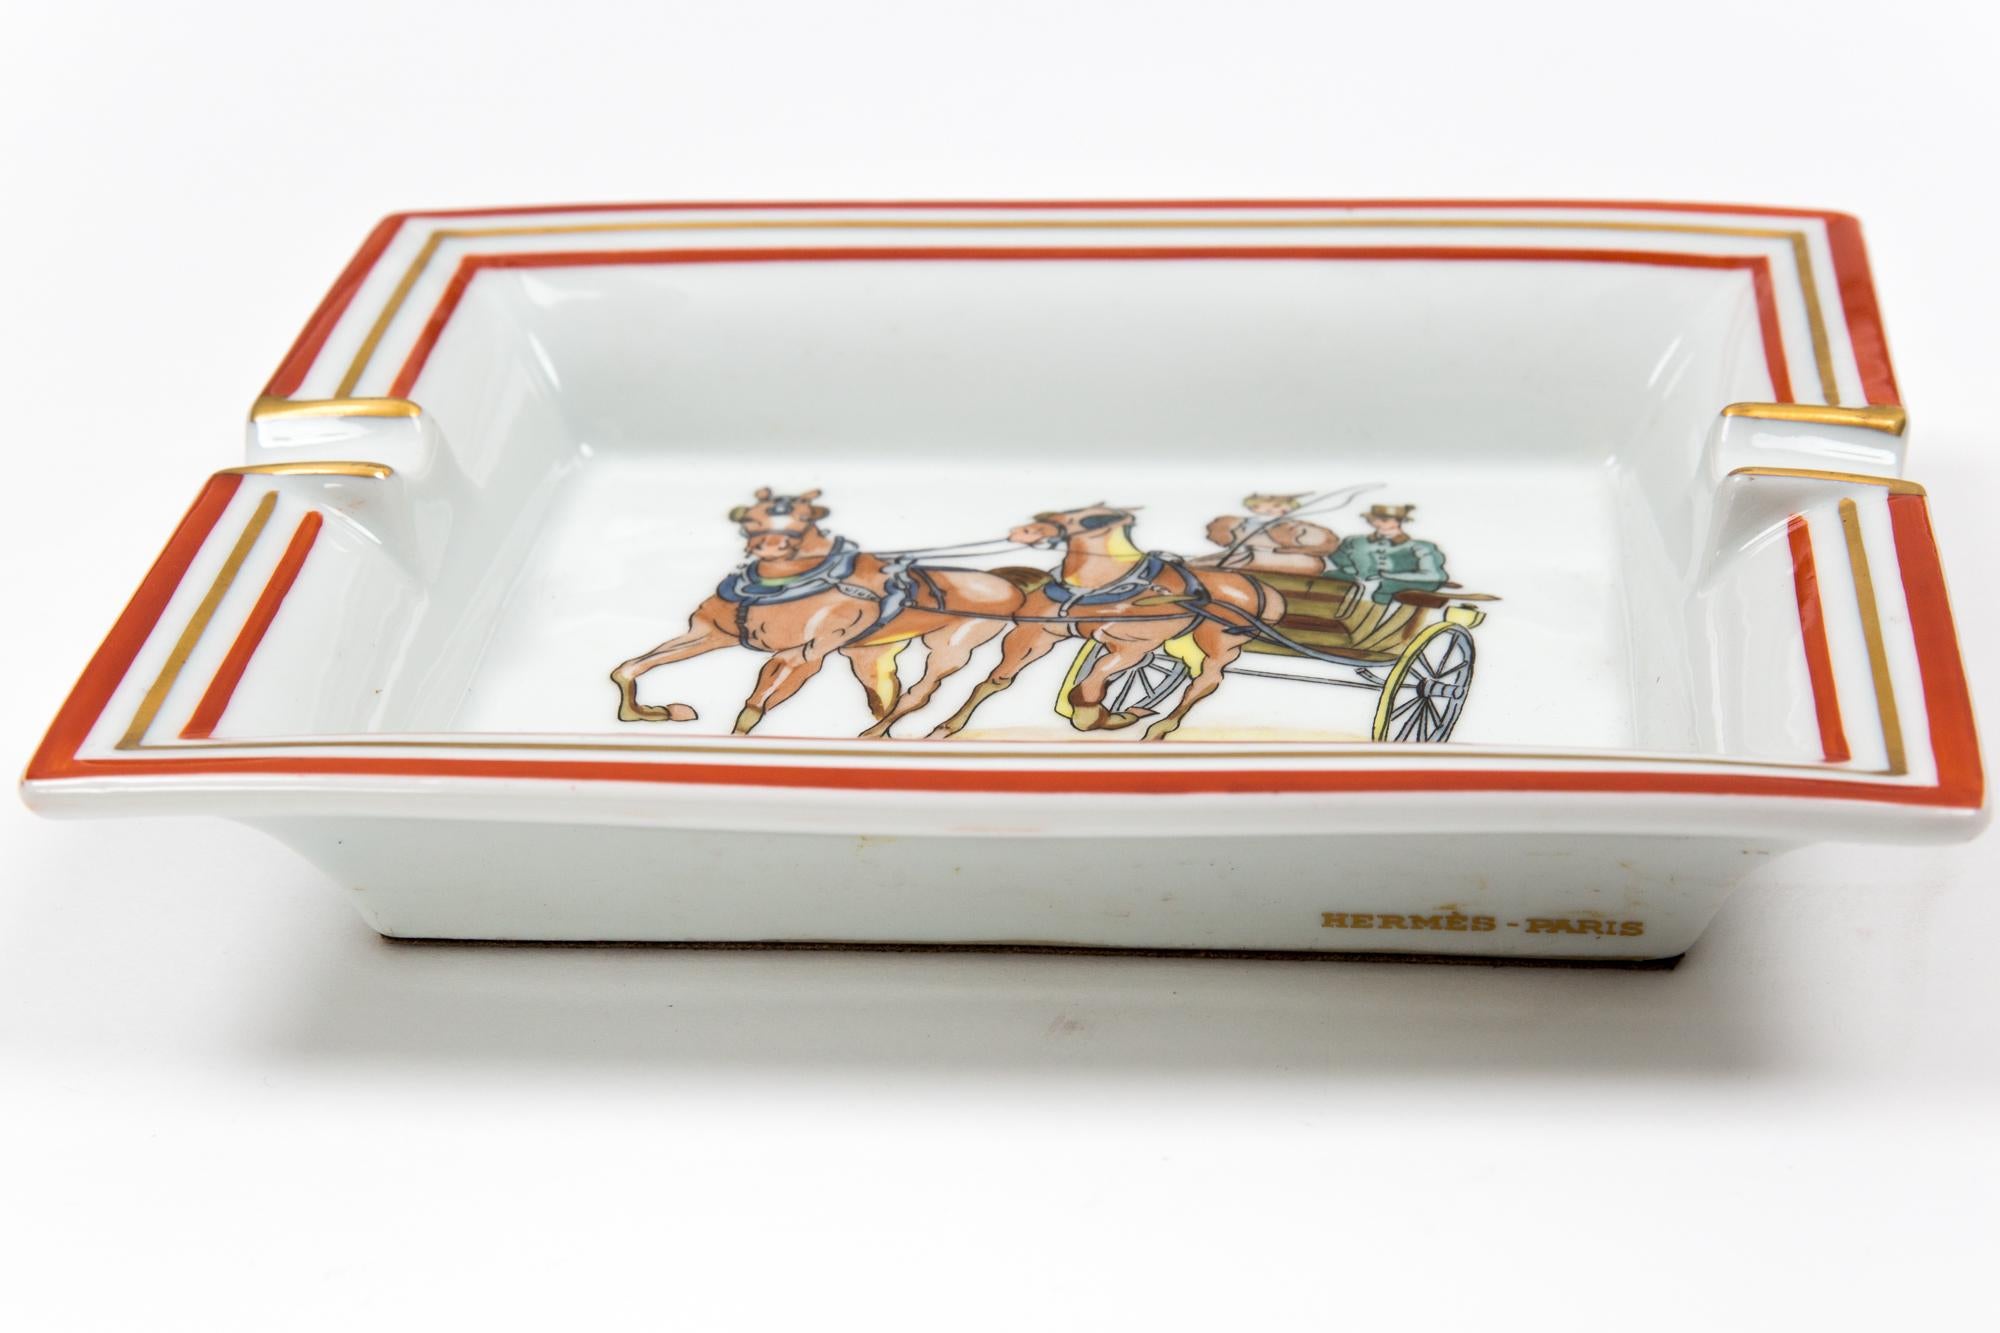 Hermes Carriage Print Porcelain Ashtray Organizer In Good Condition For Sale In Paris, FR